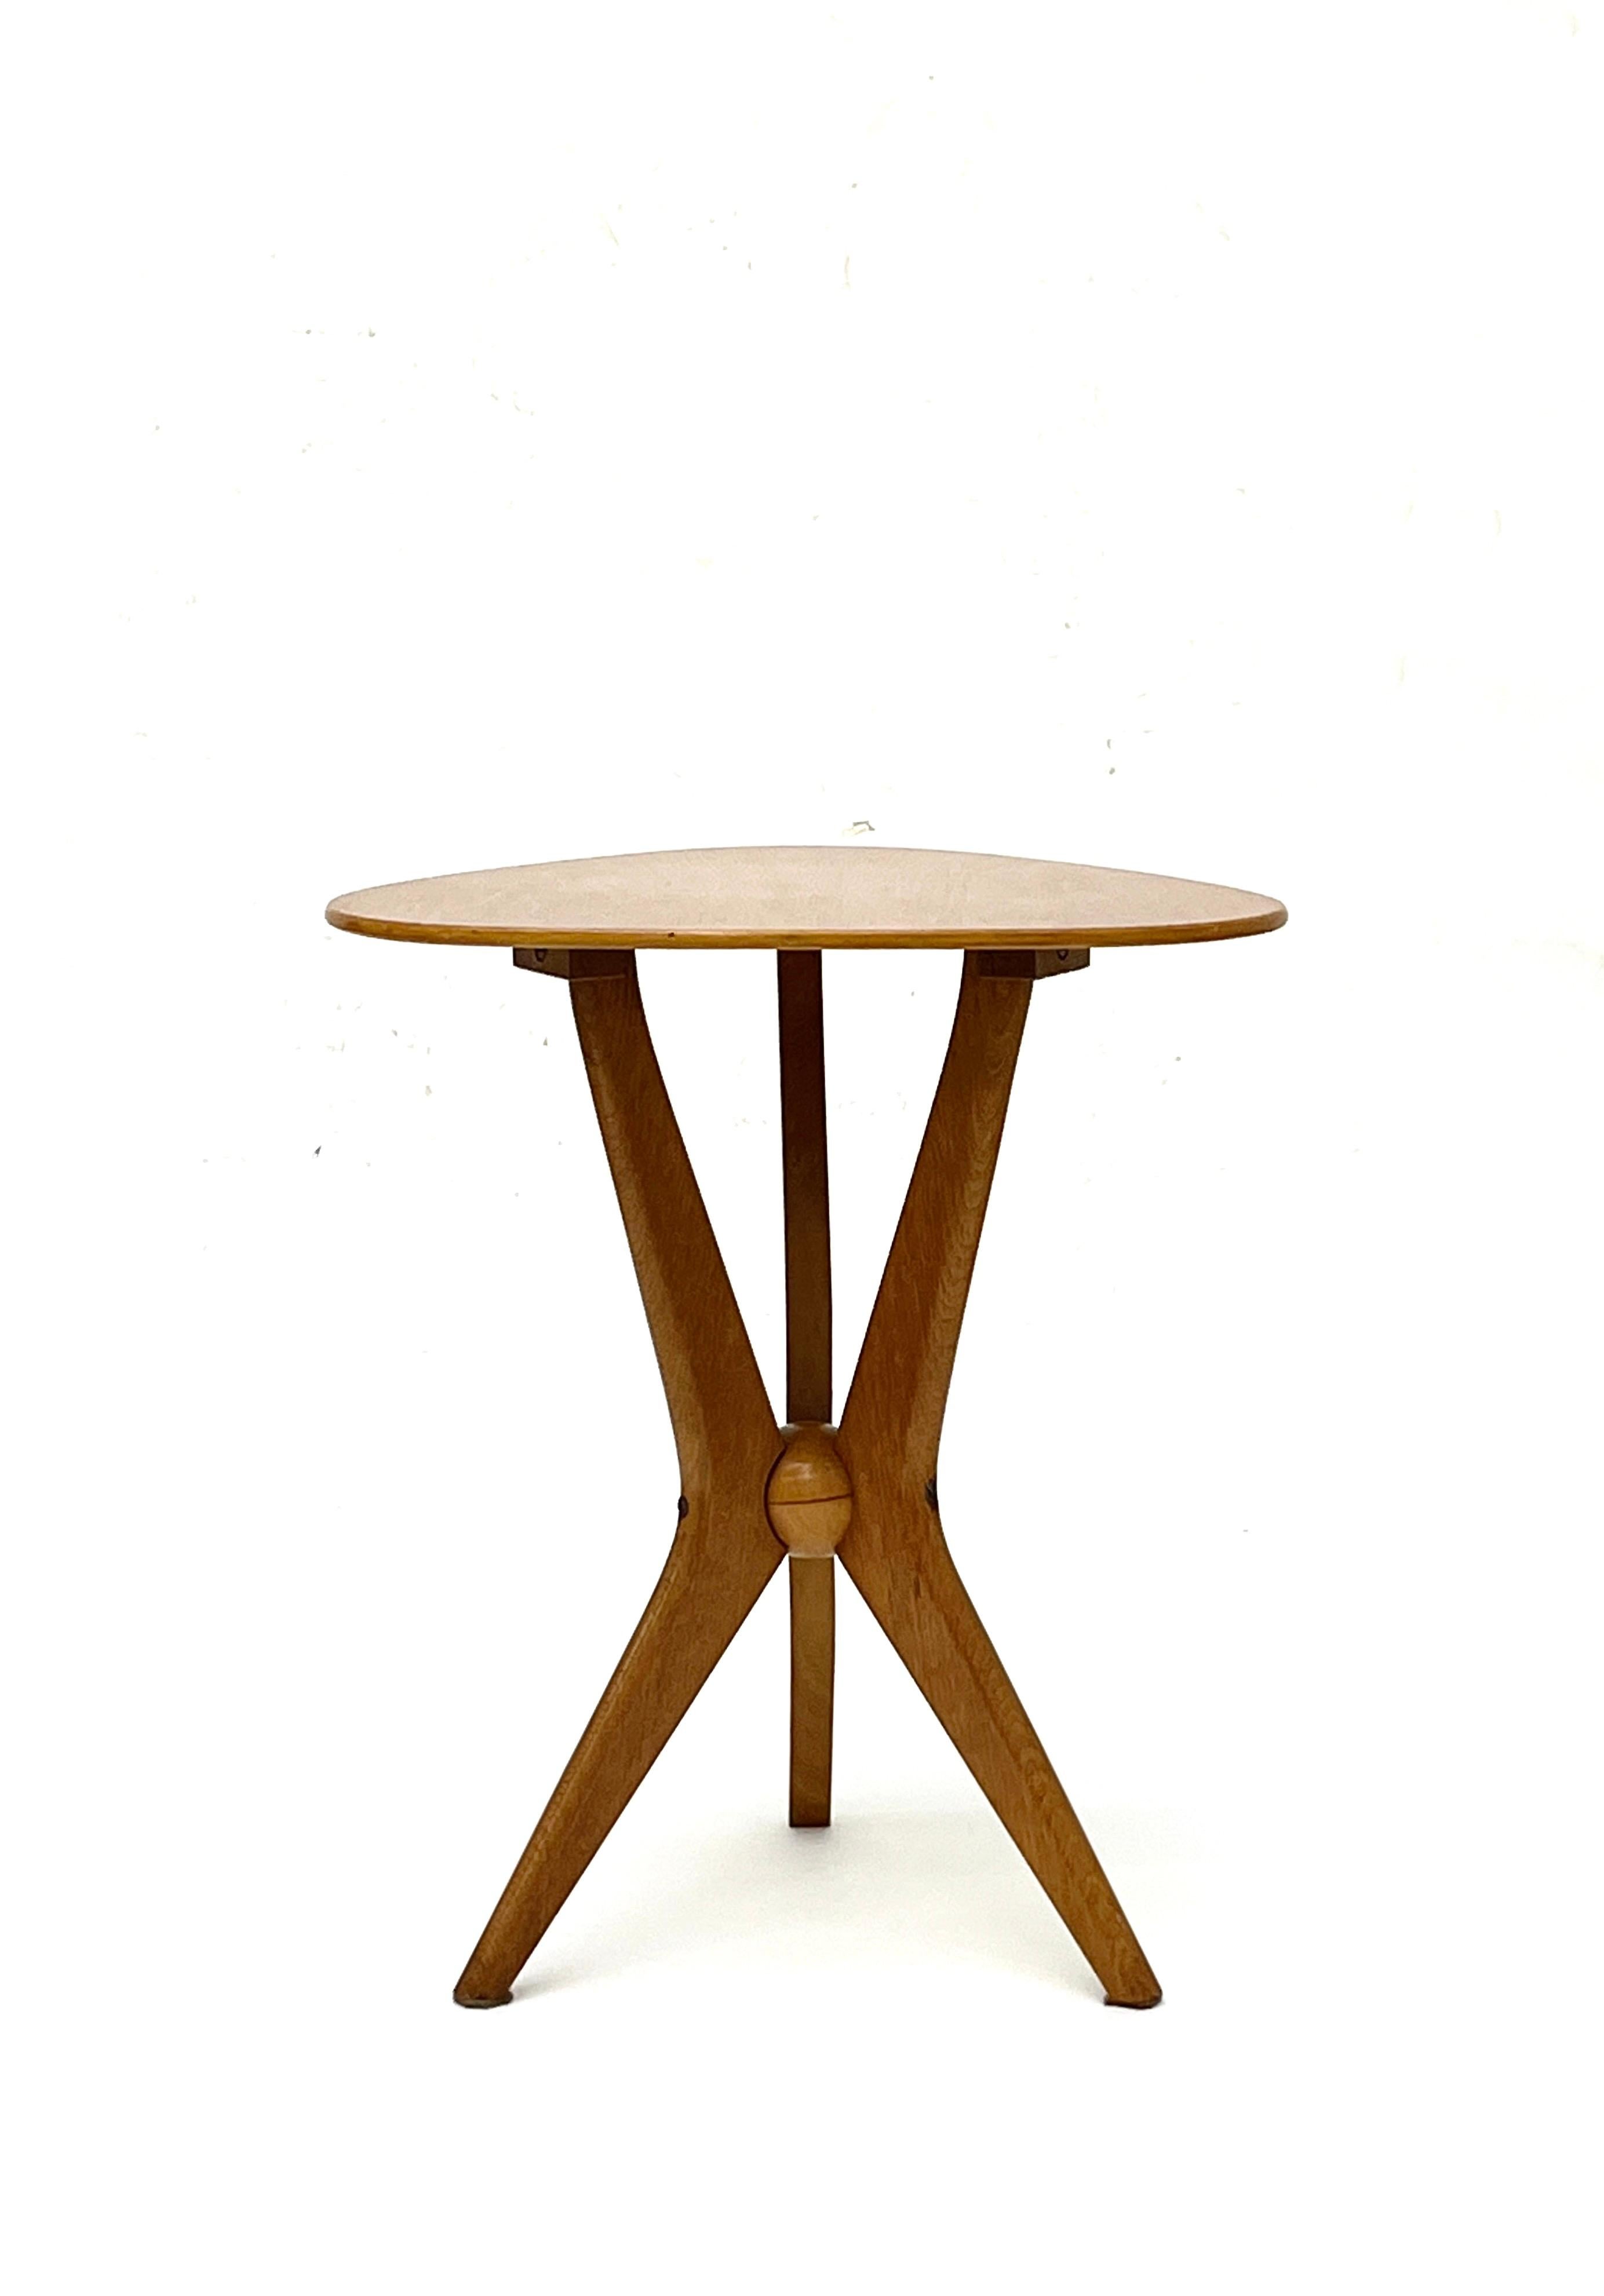 Gueridon by Rene Jean Caillette, 1950.

Gueridon designated by René Jean Caillette in 1950. It is a tray supported by three legs connected at mid-height by a sphere. The piece is entirely made of oak.

René-Jean Caillette (1919 - 2005) studied at